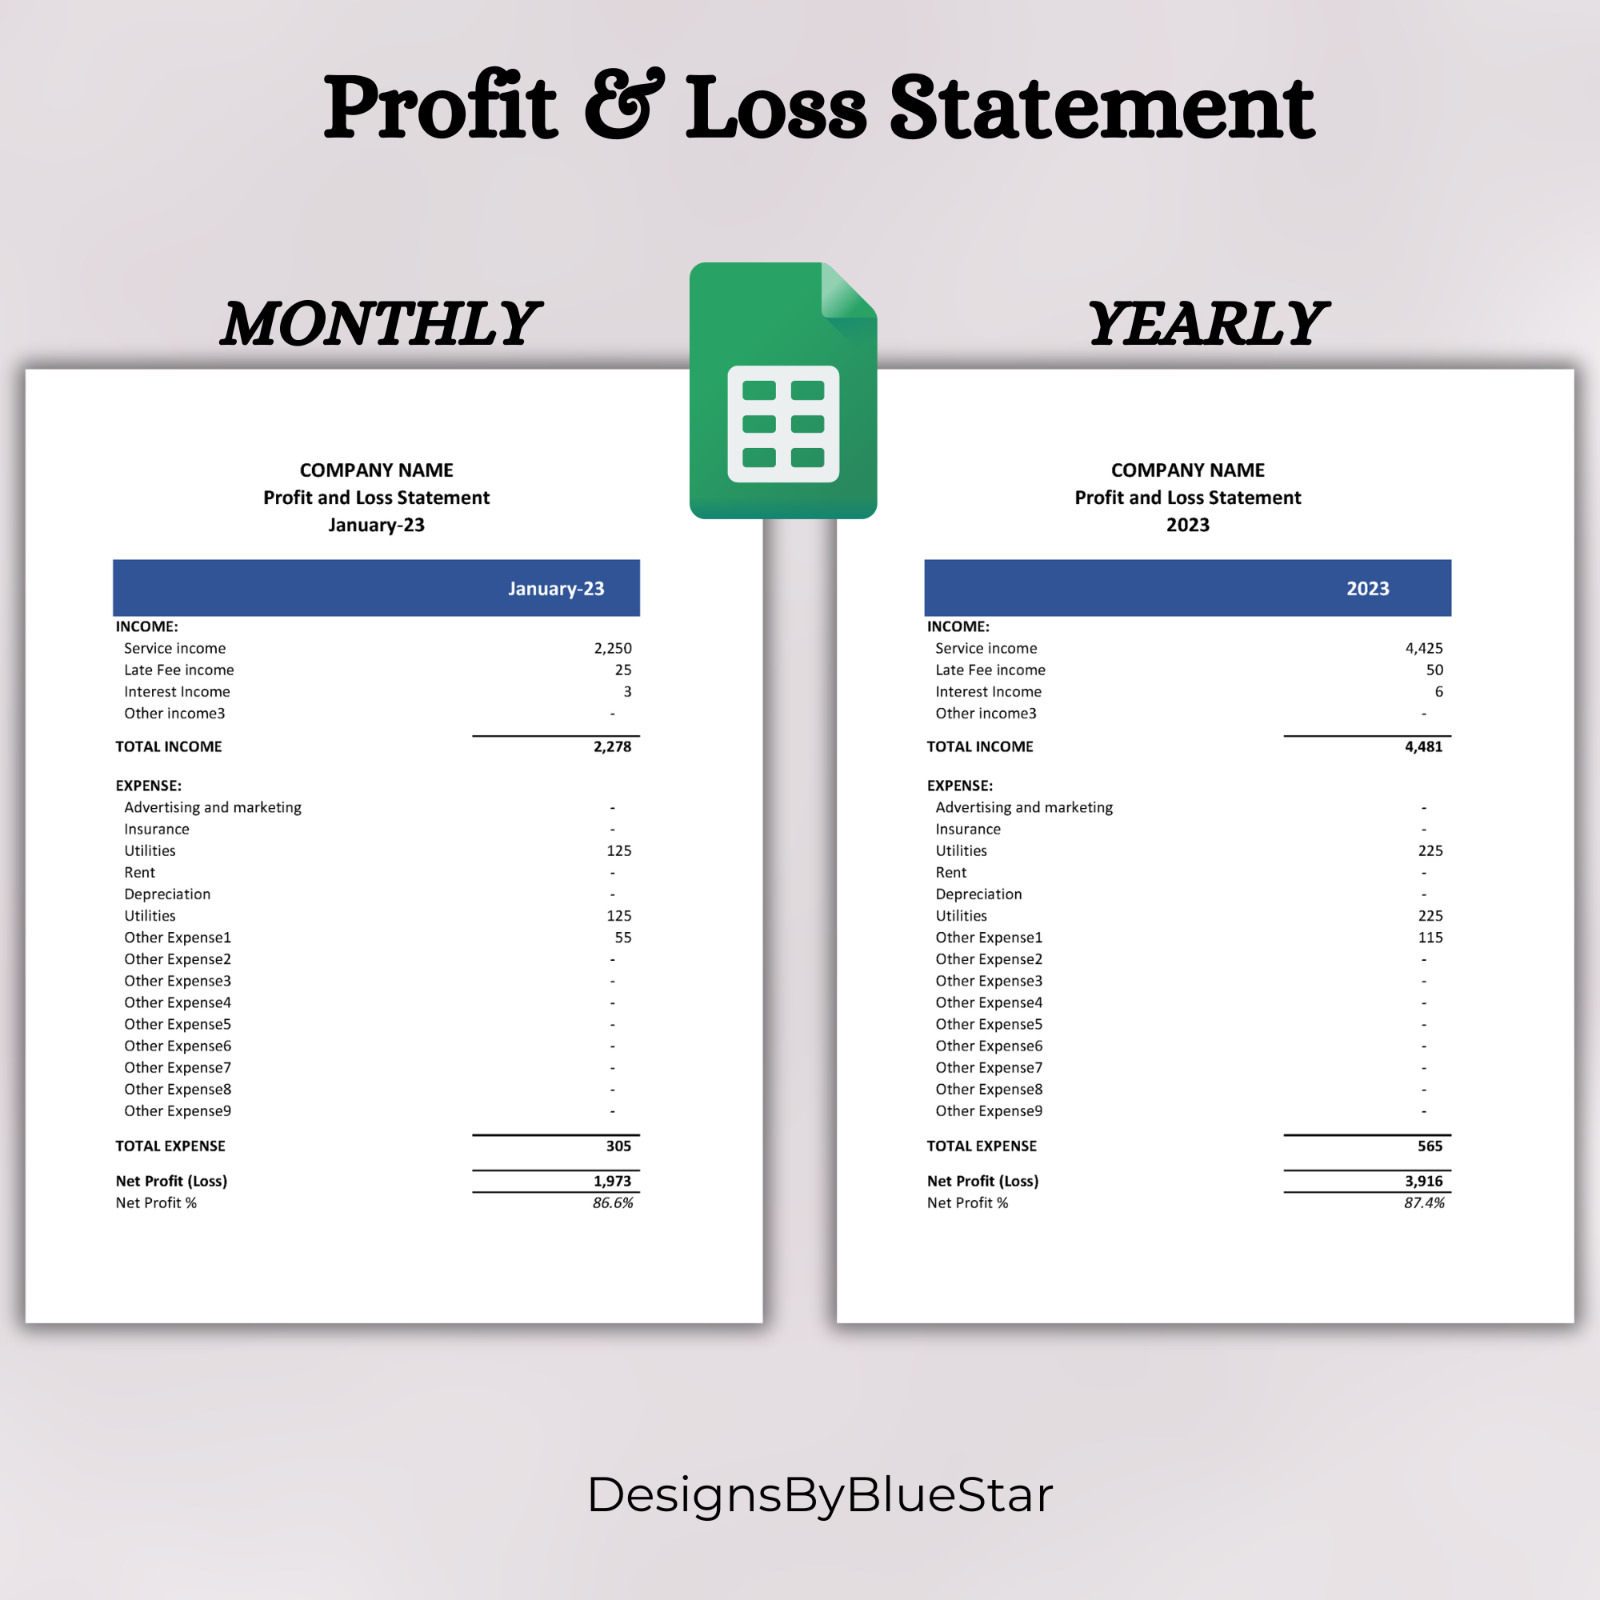 Profit and Loss Statement Template in Google Sheet, Income Statement Spreadsheet